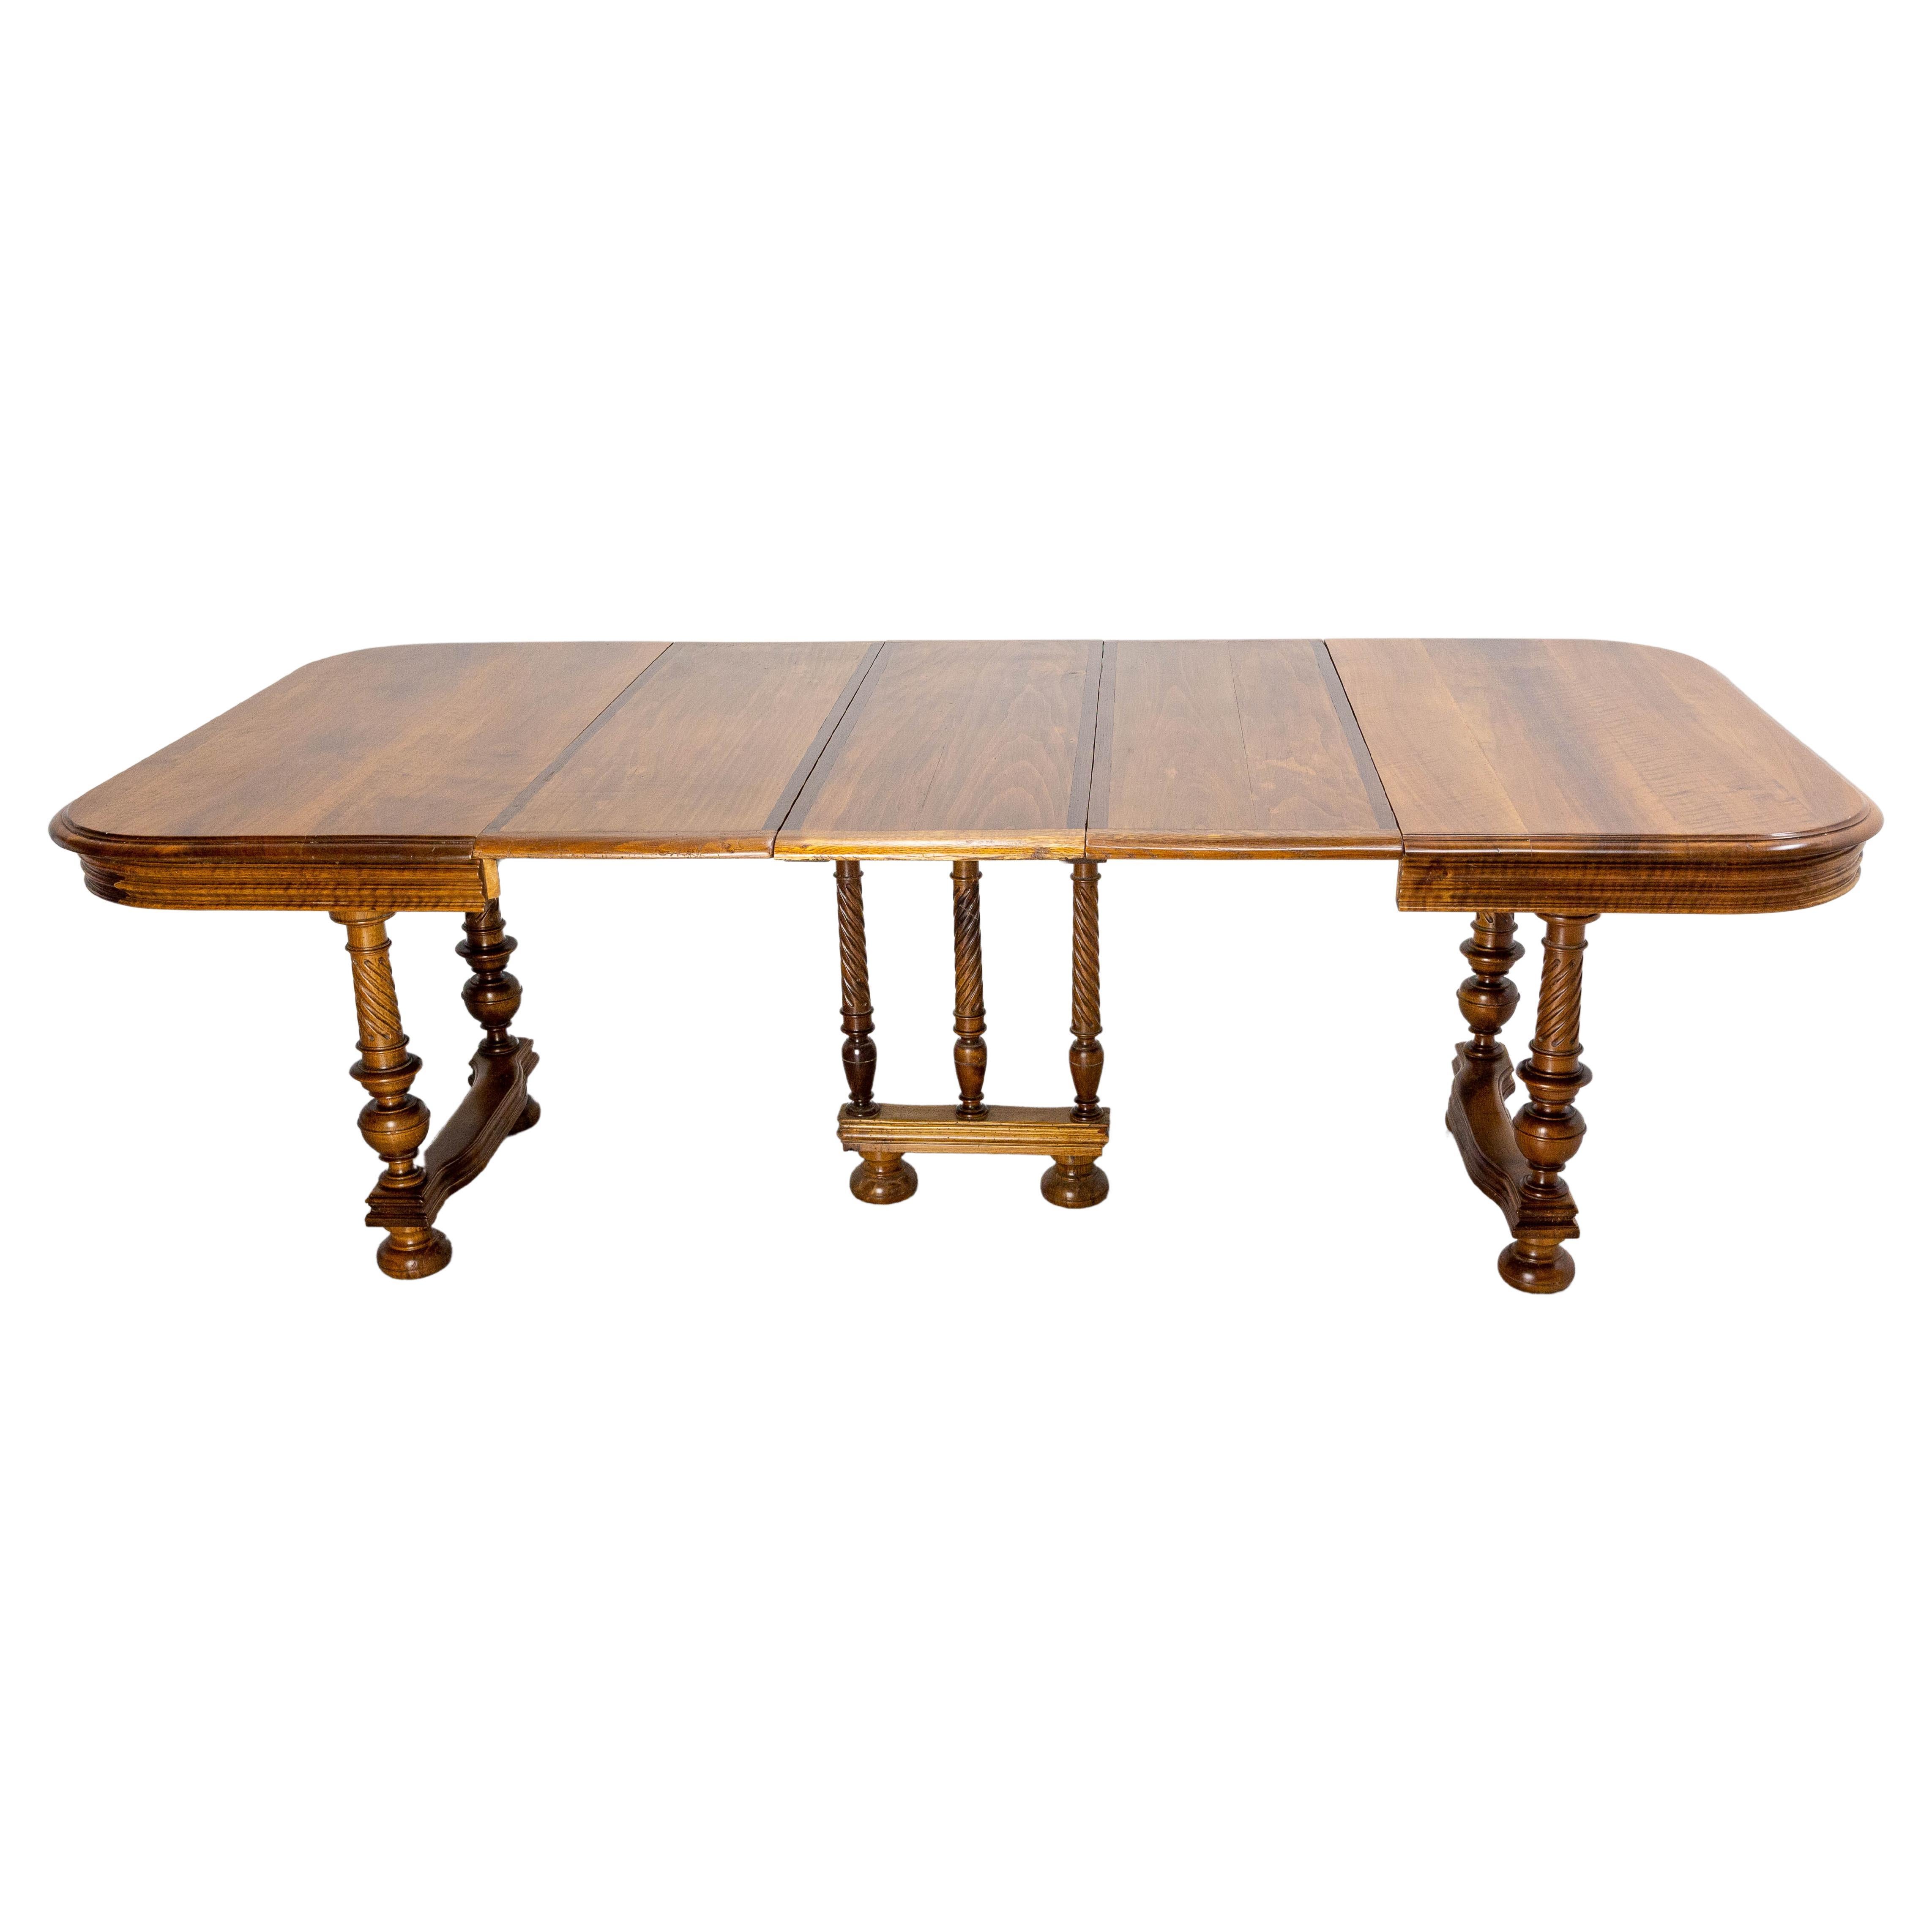 French Beech Dining Extended Table Louis XIII Style, Late 19th Century For Sale